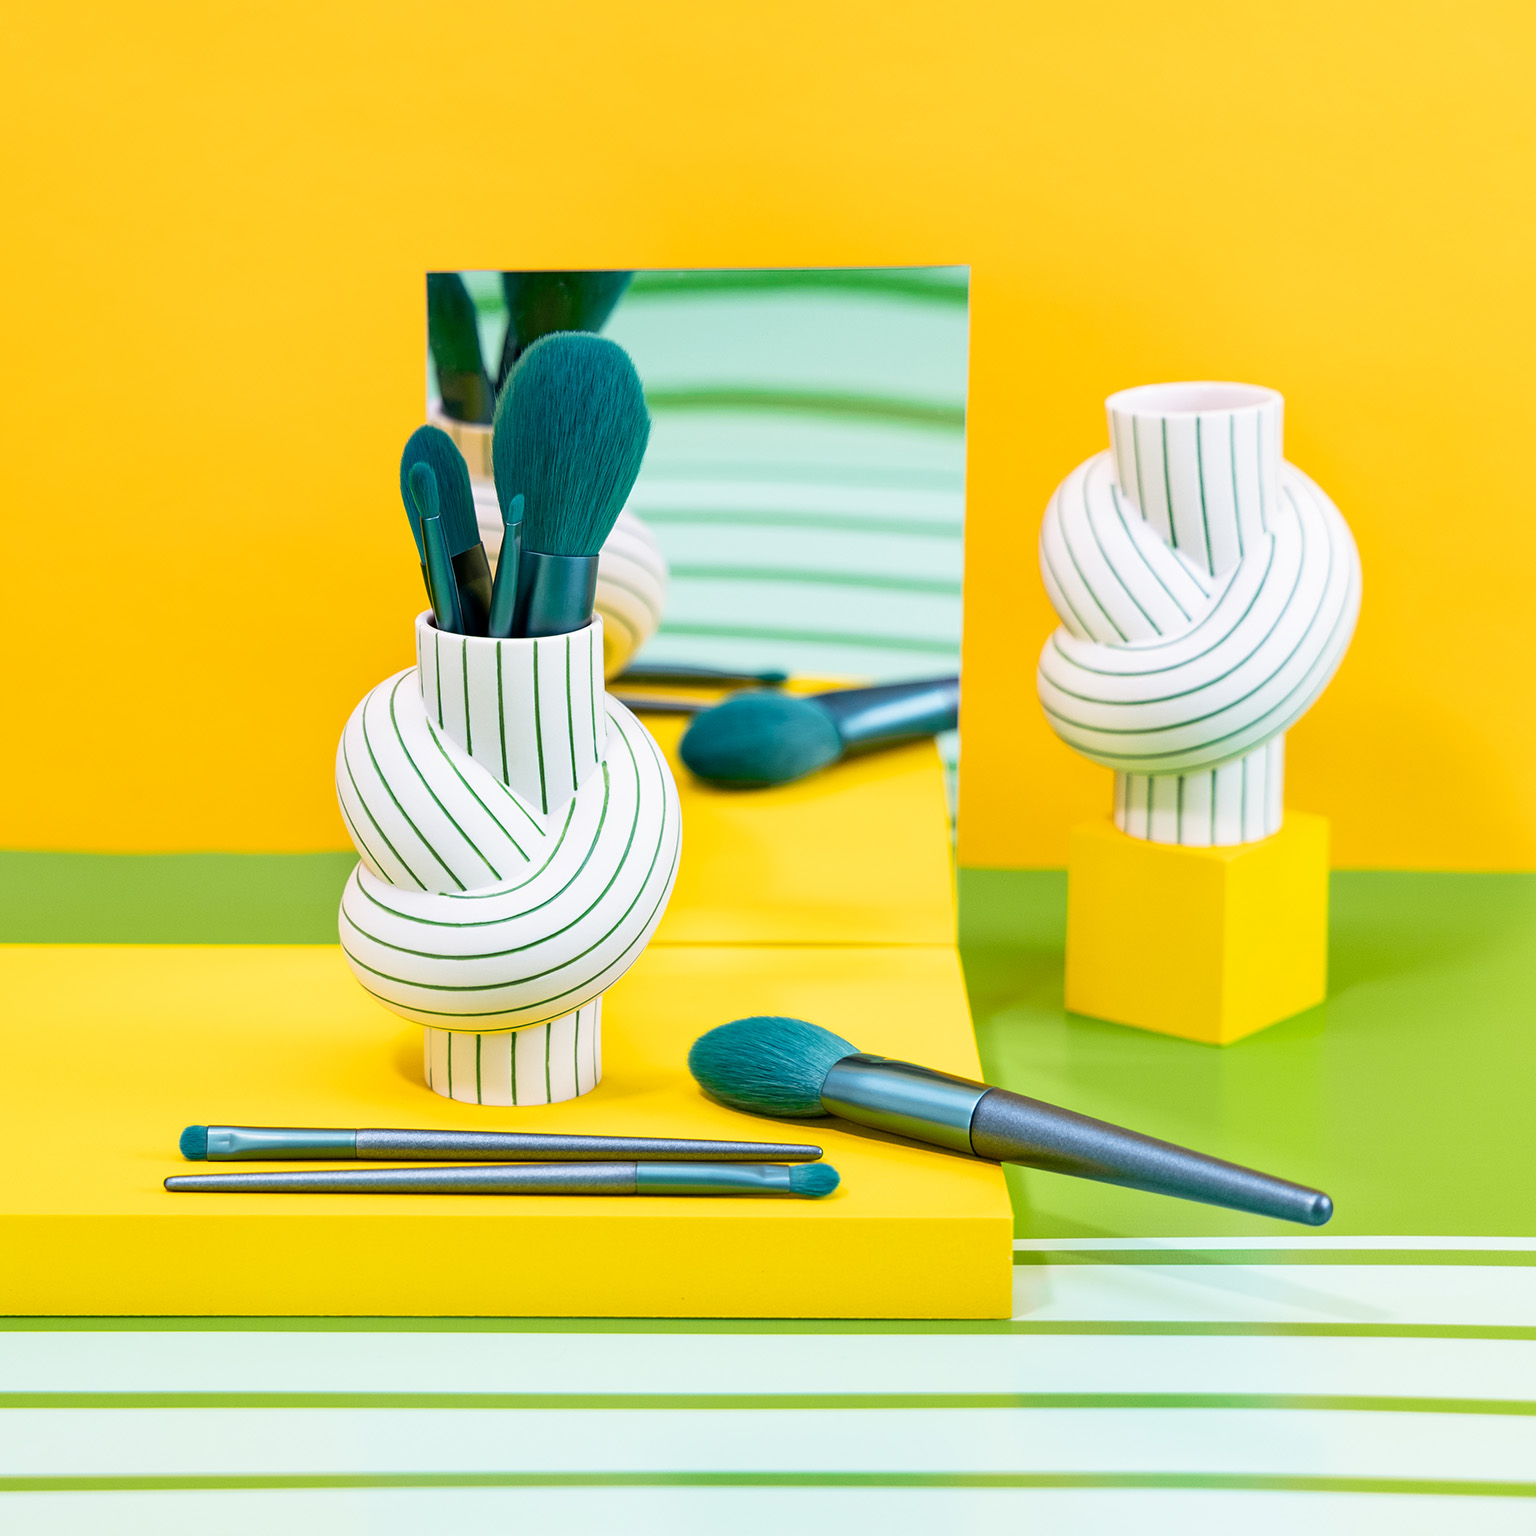 Vase Node Stripes Apple filled with petrol-coloured make-up brushes against a yellow background with white and green stripes and mirror.